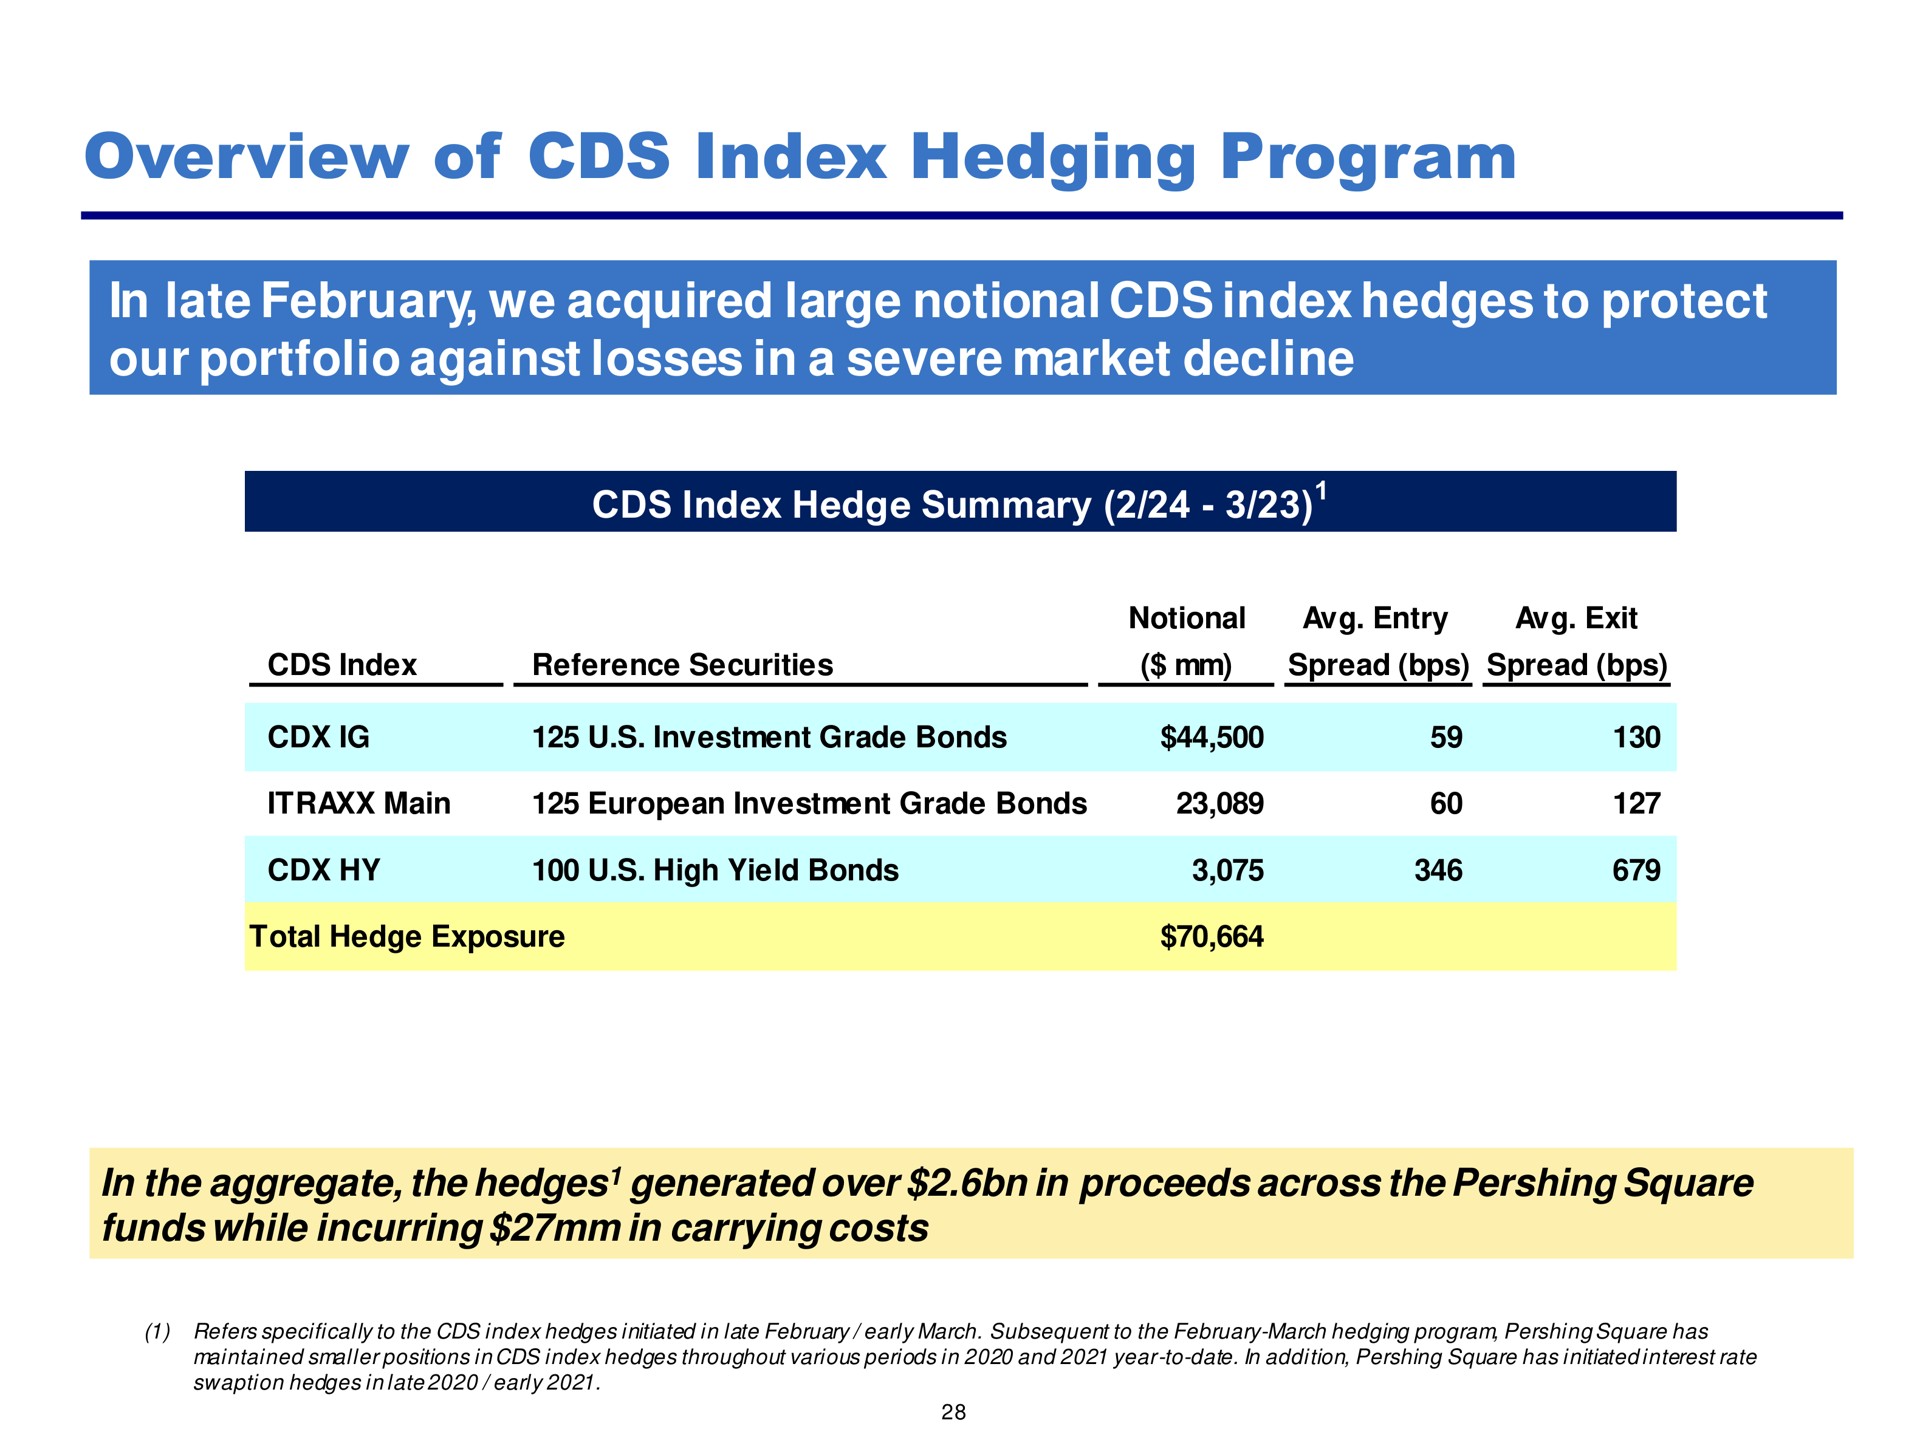 overview of index hedging program in late we acquired large notional hedges to protect our portfolio against losses in a severe market decline | Pershing Square